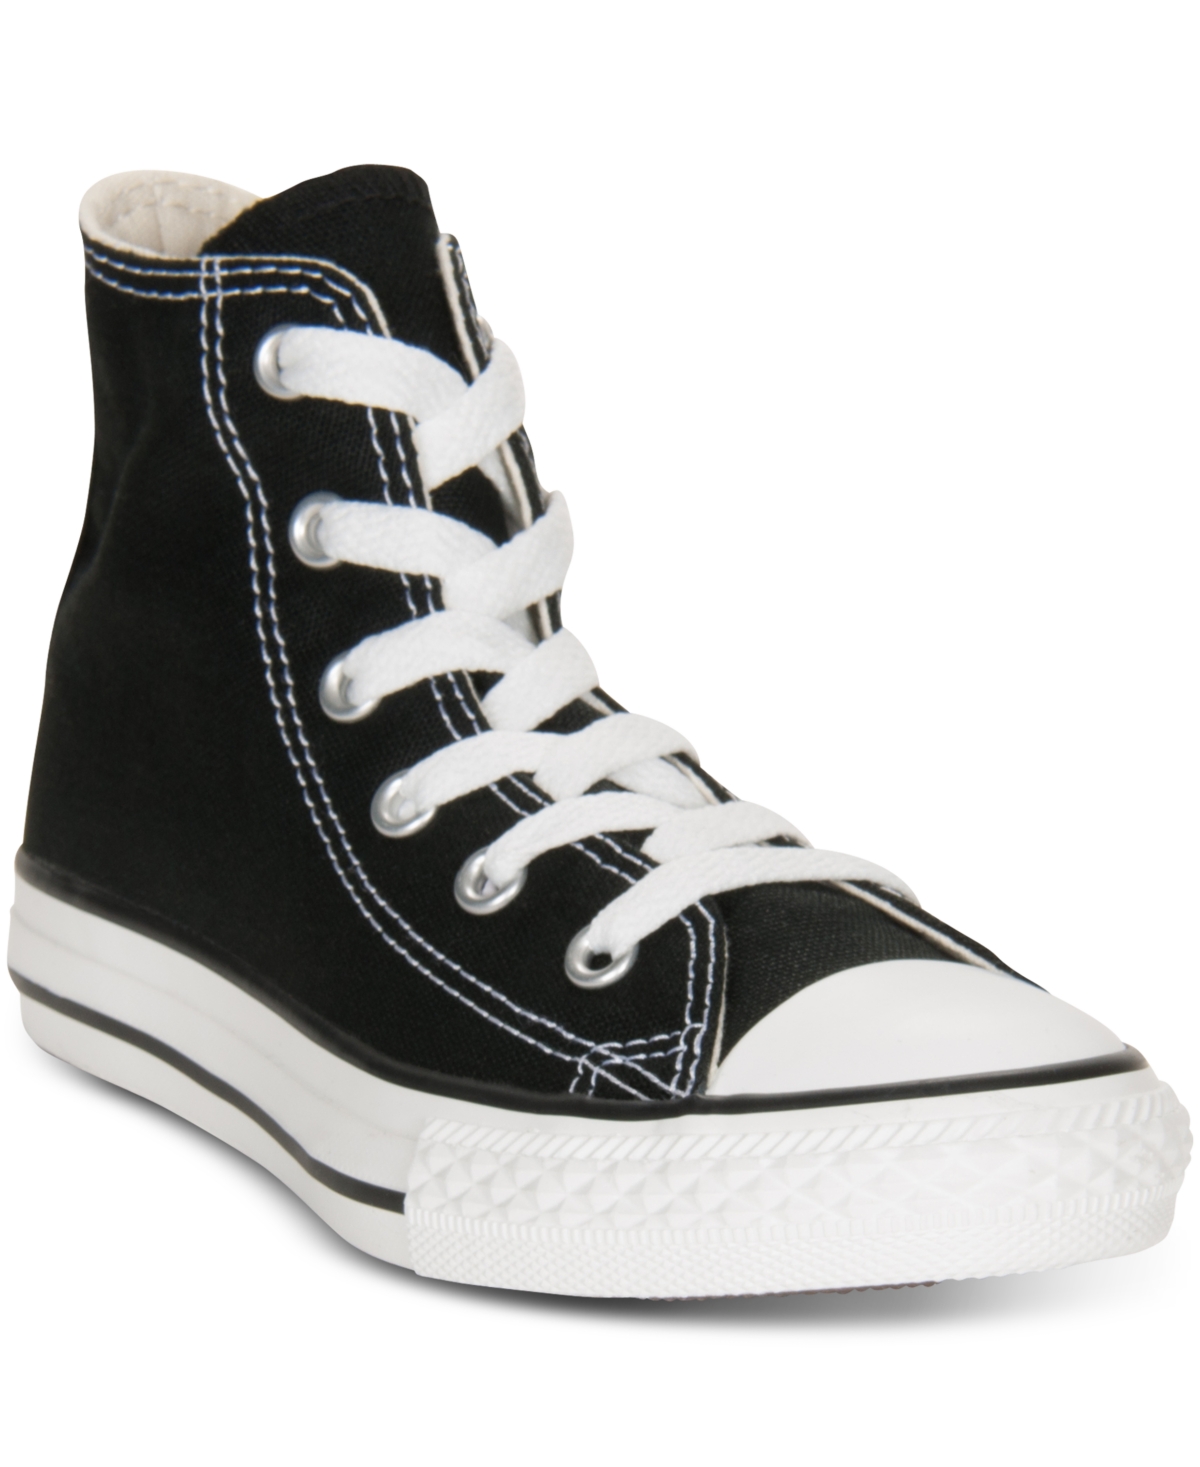 UPC 022866376846 product image for Converse Little Kids Chuck Taylor Hi Casual Sneakers from Finish Line | upcitemdb.com